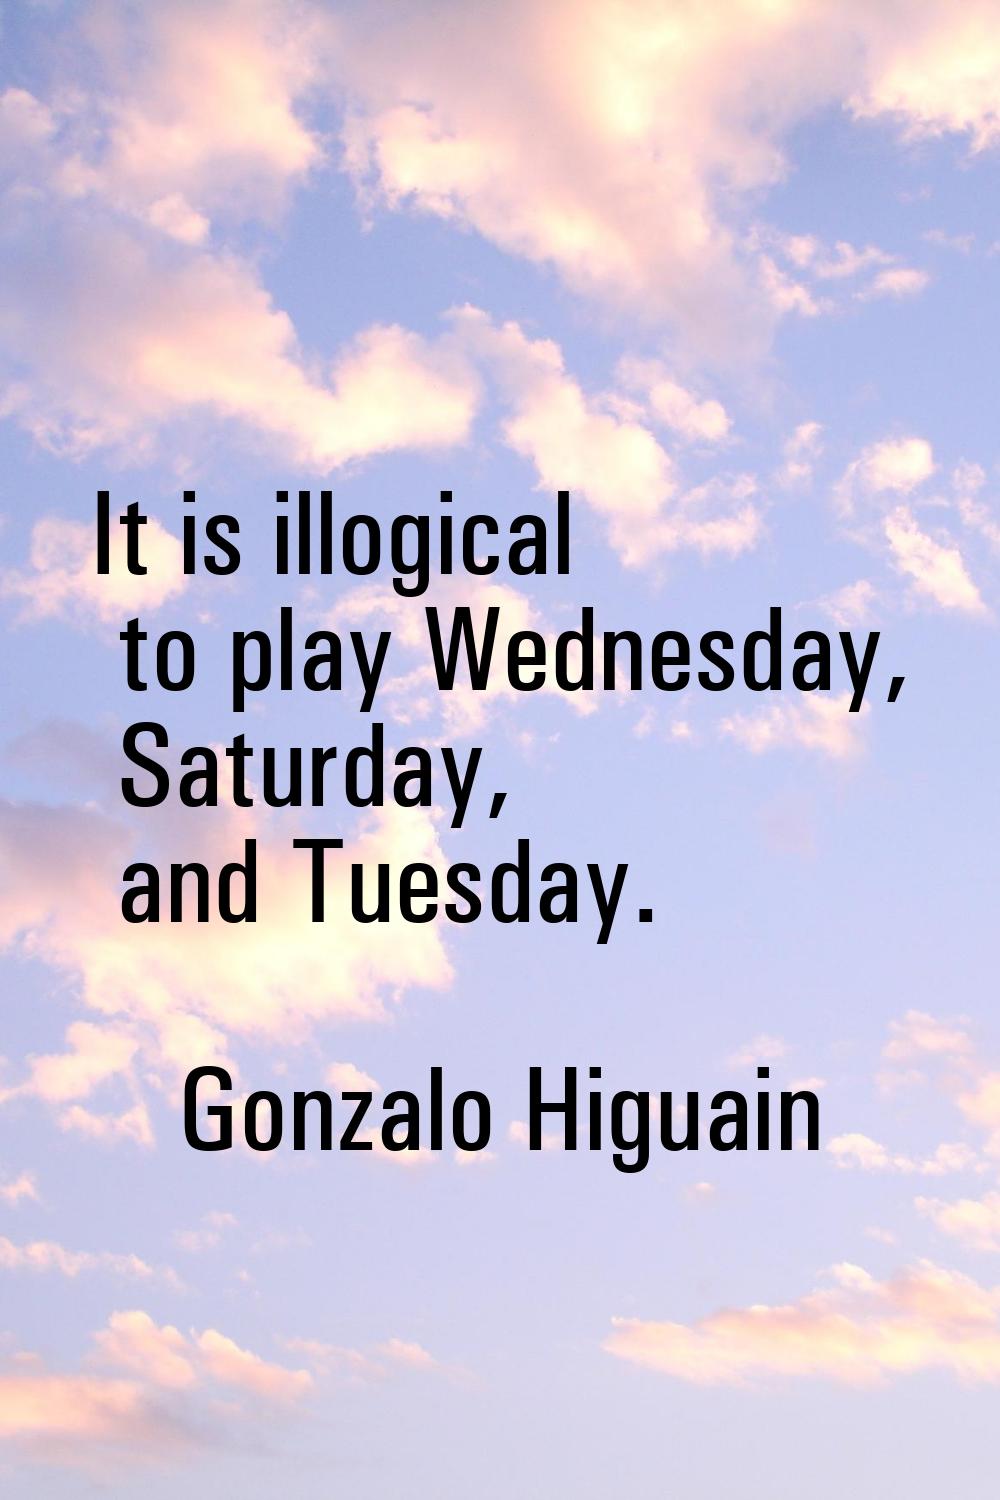 It is illogical to play Wednesday, Saturday, and Tuesday.